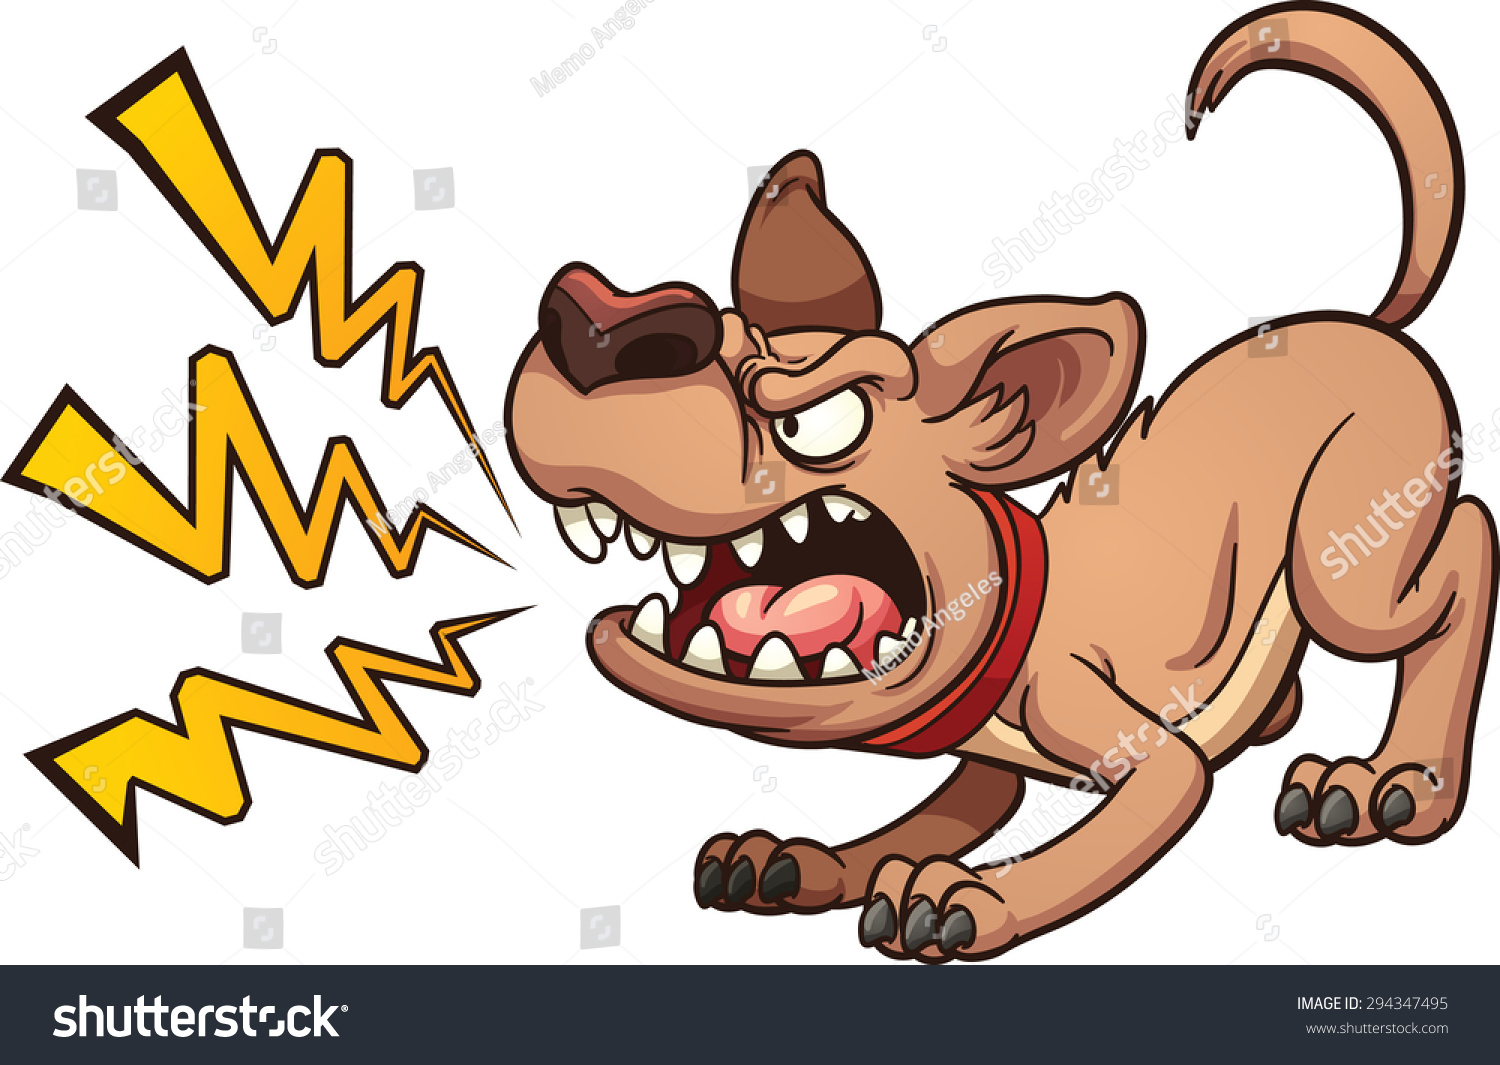 clipart of a dog barking - photo #25